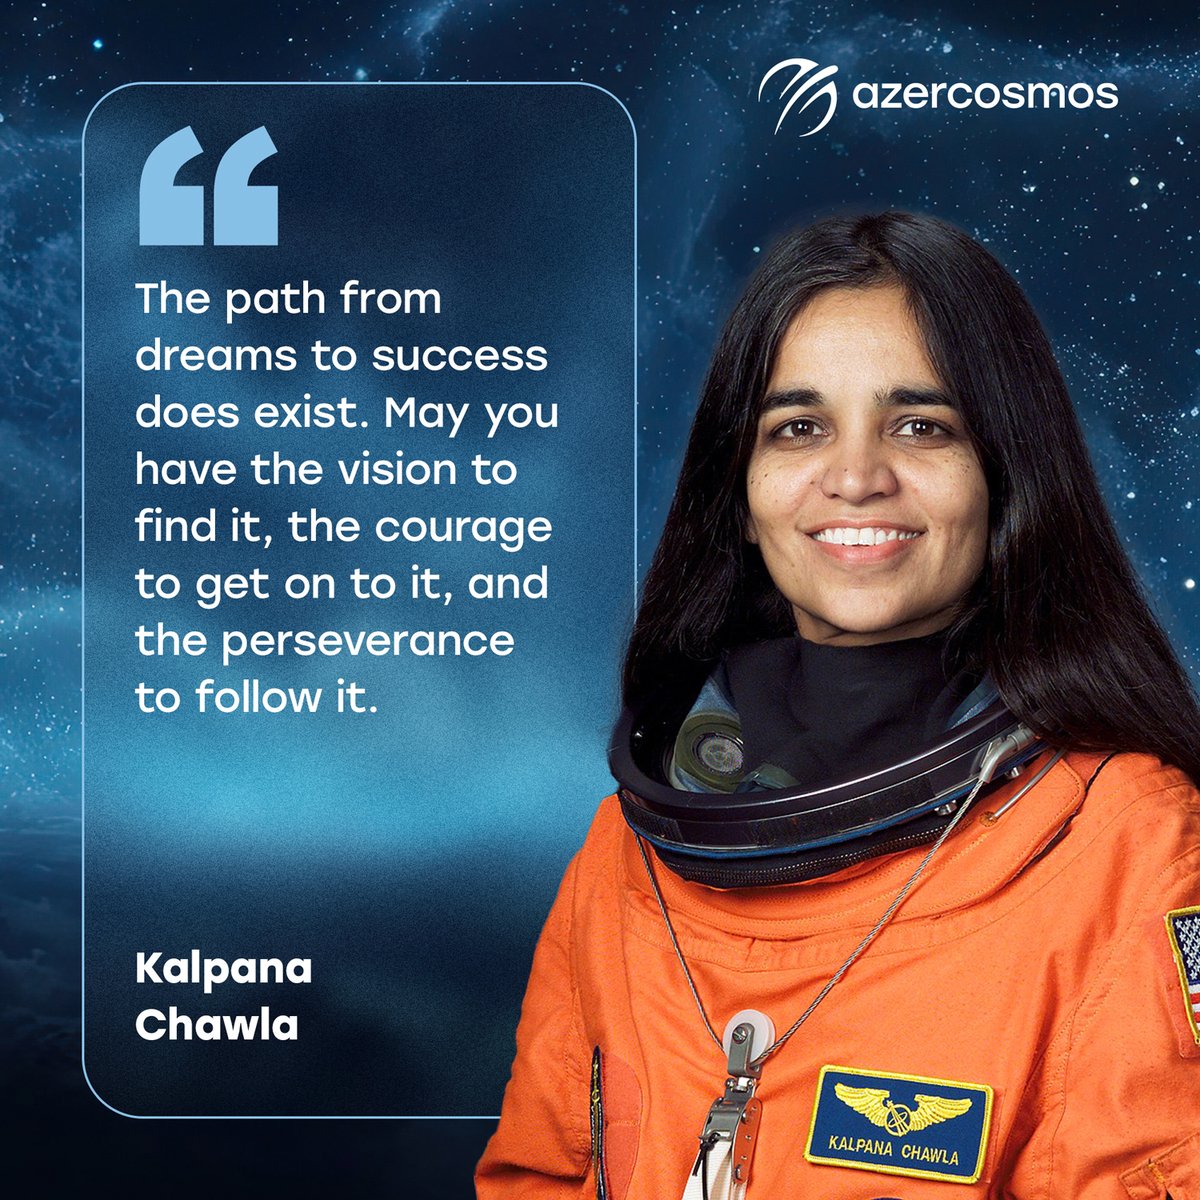 It takes courage to follow the path of your dreams. May the universe accompany on your journey! 💫 #Azercosmos #MondayMotivation